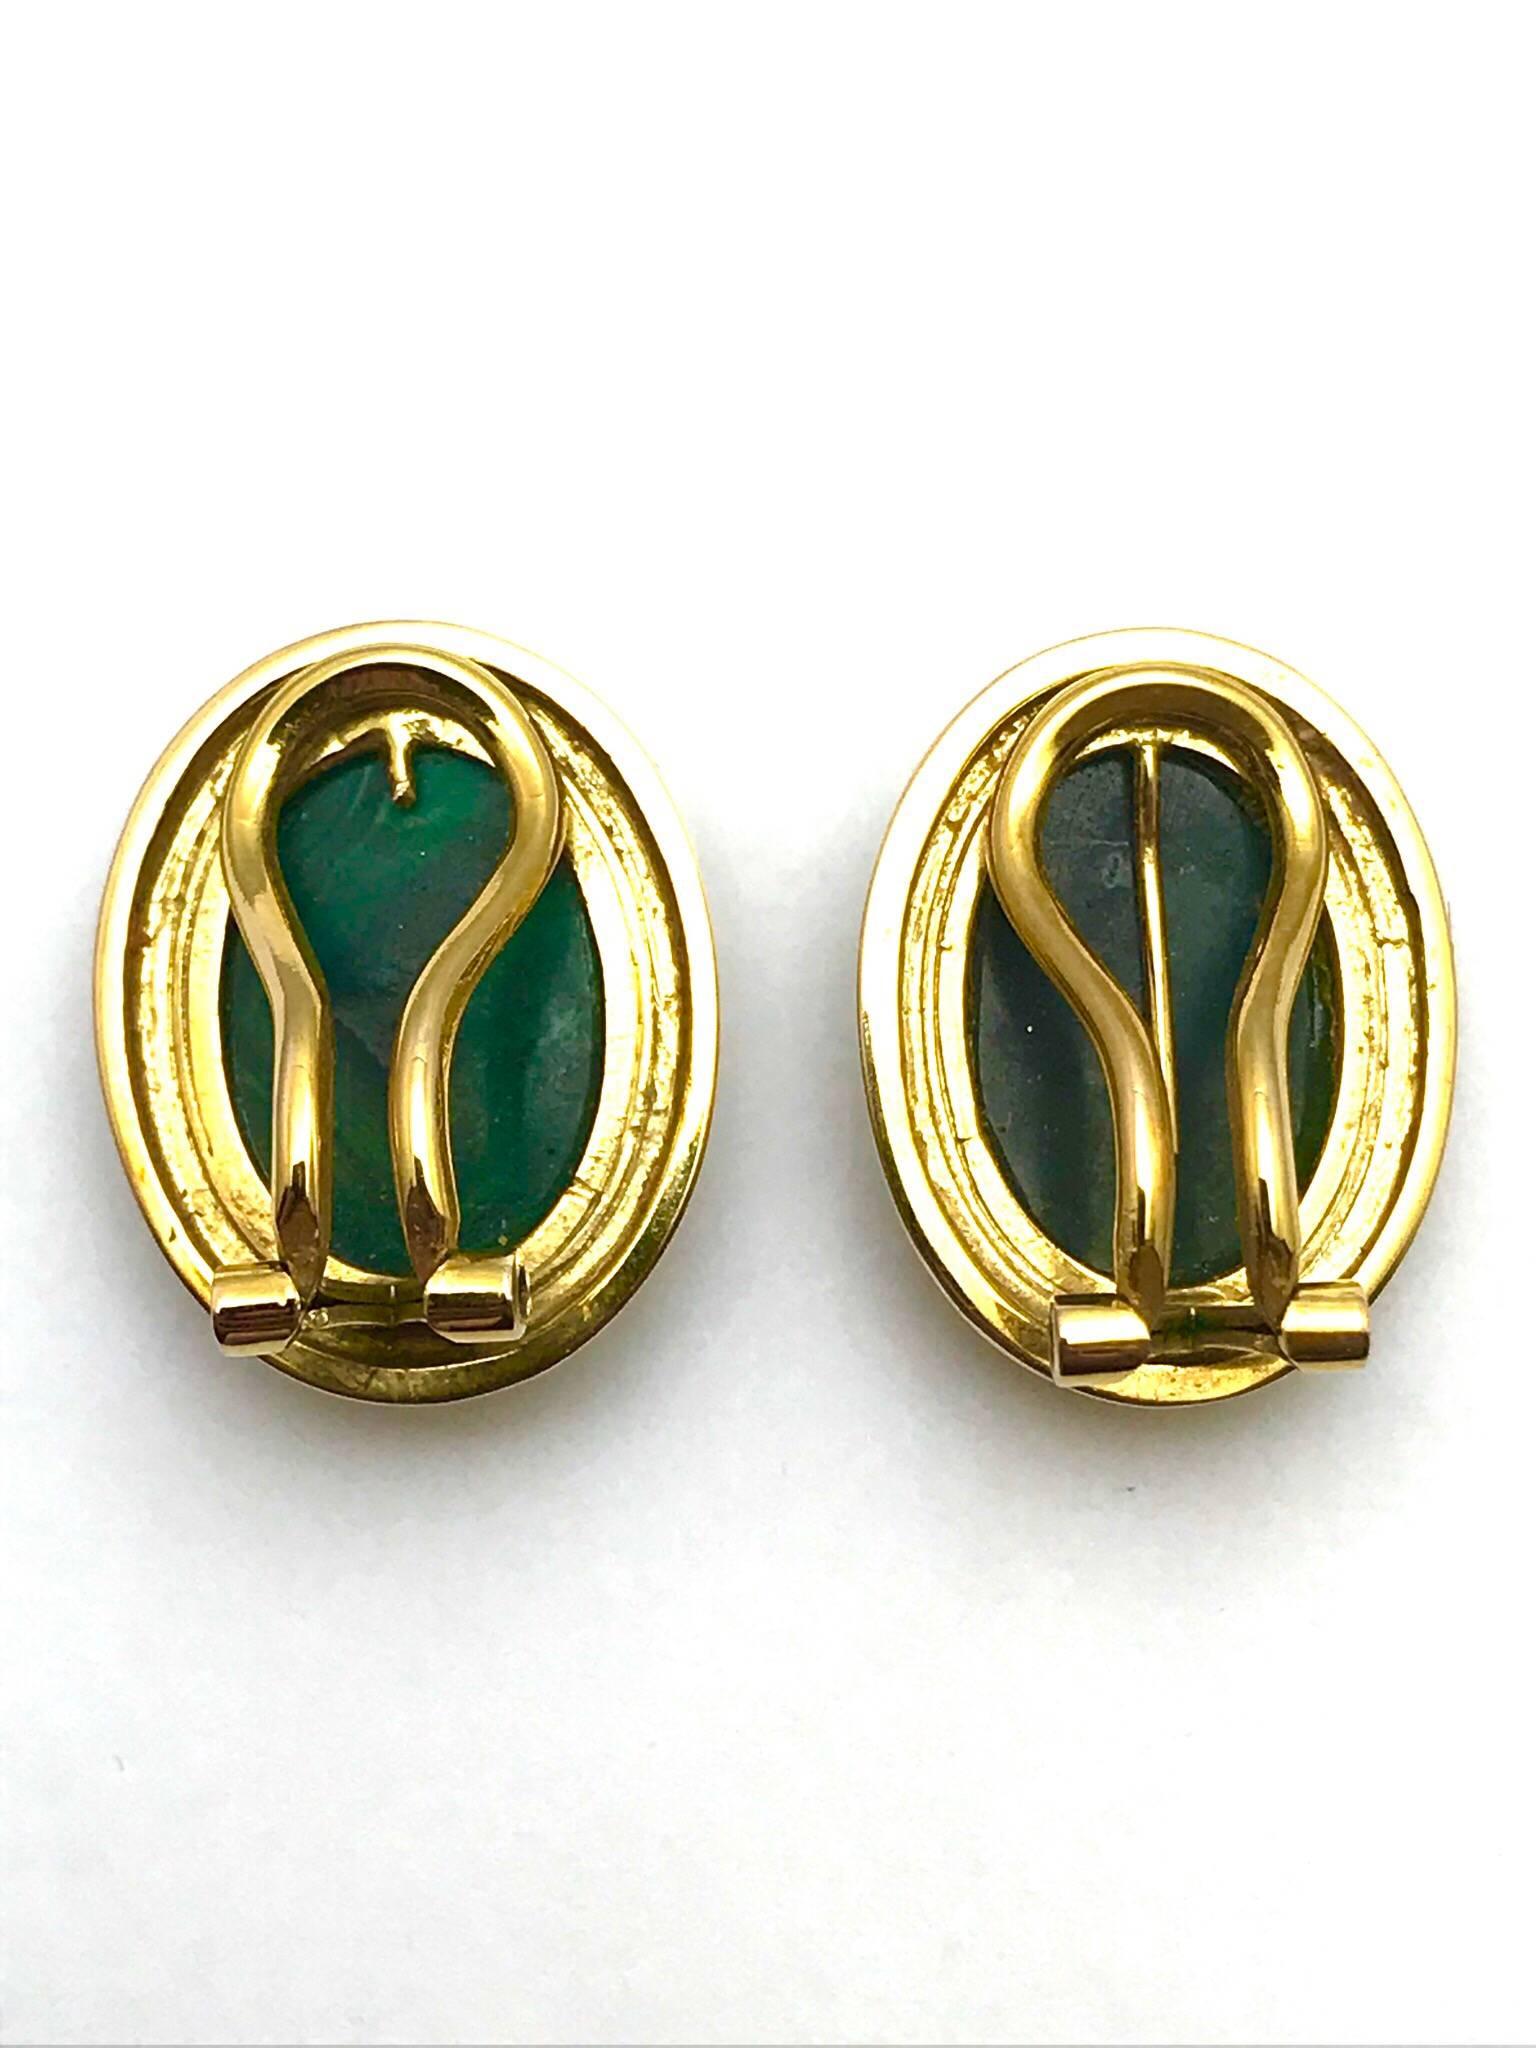 Oval Cut Malachite and Yellow Gold Clip Earrings